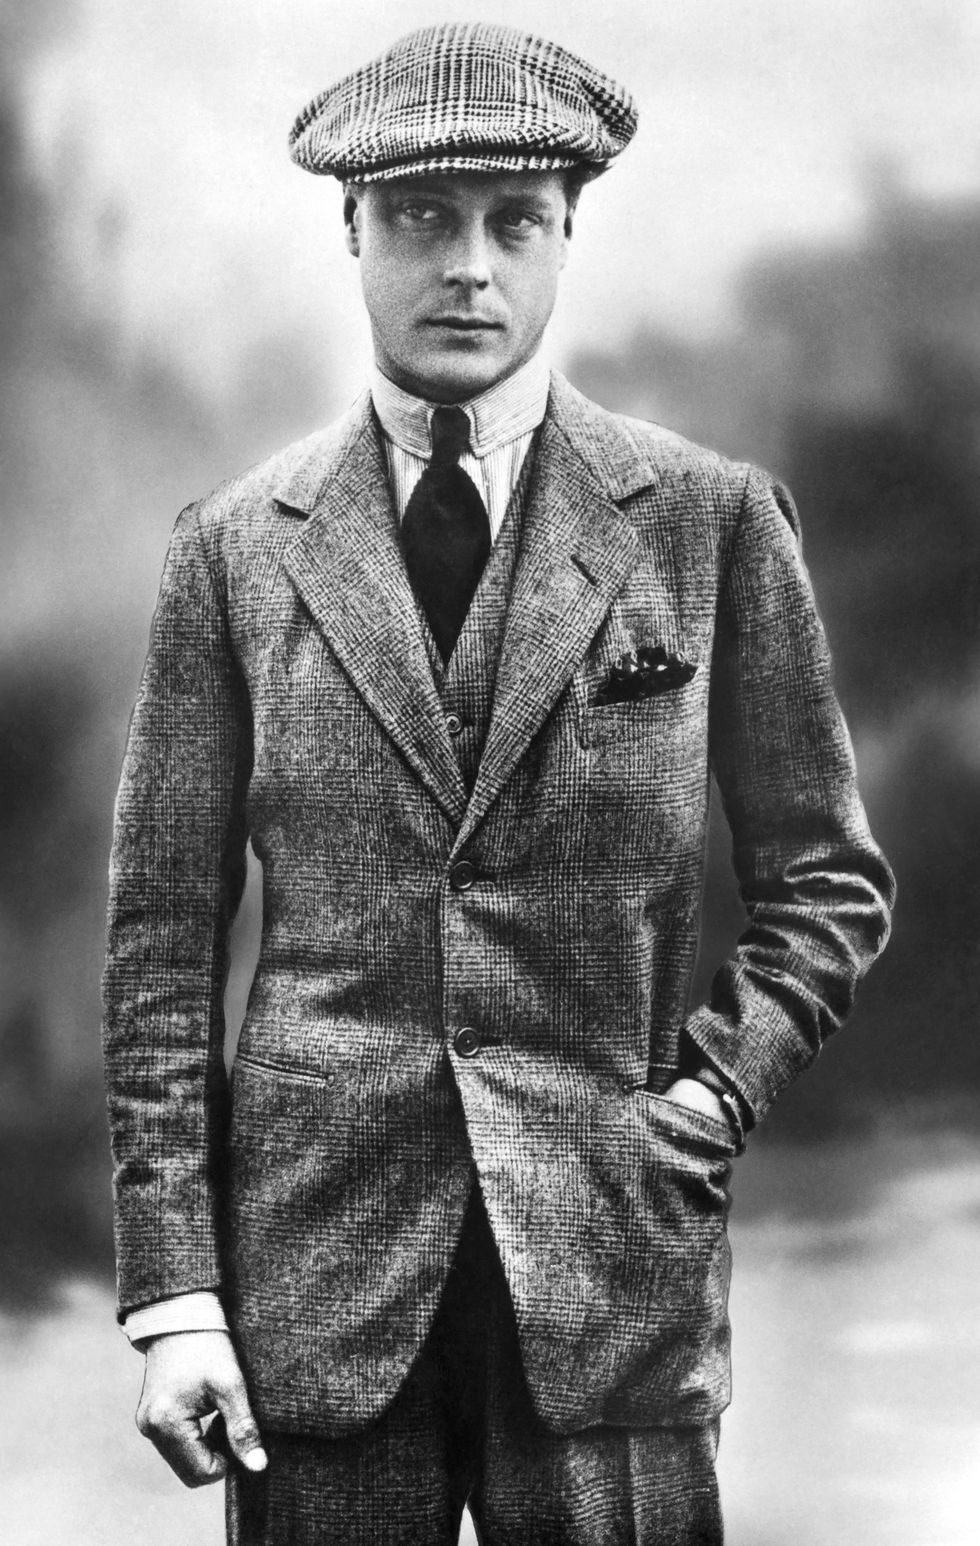 king edward viii, of united kingdom, portrait, 1936 photo by universal history archiveuniversal images group via getty images